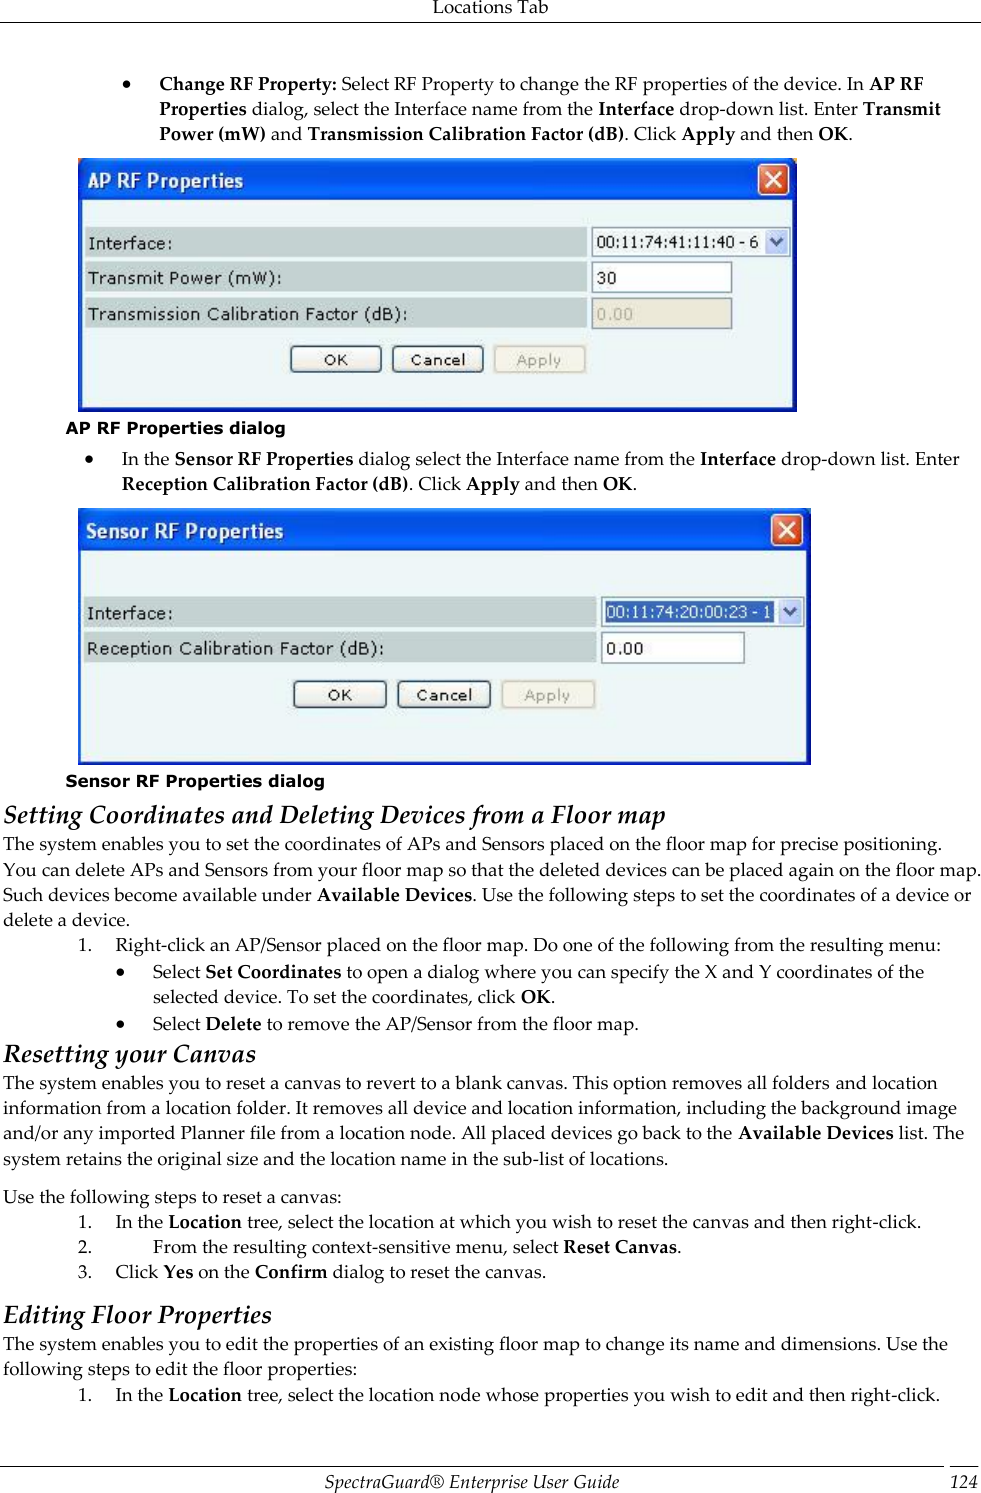 Locations Tab SpectraGuard®  Enterprise User Guide 124  Change RF Property: Select RF Property to change the RF properties of the device. In AP RF Properties dialog, select the Interface name from the Interface drop-down list. Enter Transmit Power (mW) and Transmission Calibration Factor (dB). Click Apply and then OK.  AP RF Properties dialog  In the Sensor RF Properties dialog select the Interface name from the Interface drop-down list. Enter Reception Calibration Factor (dB). Click Apply and then OK.  Sensor RF Properties dialog Setting Coordinates and Deleting Devices from a Floor map The system enables you to set the coordinates of APs and Sensors placed on the floor map for precise positioning. You can delete APs and Sensors from your floor map so that the deleted devices can be placed again on the floor map. Such devices become available under Available Devices. Use the following steps to set the coordinates of a device or delete a device. 1. Right-click an AP/Sensor placed on the floor map. Do one of the following from the resulting menu:  Select Set Coordinates to open a dialog where you can specify the X and Y coordinates of the selected device. To set the coordinates, click OK.  Select Delete to remove the AP/Sensor from the floor map. Resetting your Canvas The system enables you to reset a canvas to revert to a blank canvas. This option removes all folders and location information from a location folder. It removes all device and location information, including the background image and/or any imported Planner file from a location node. All placed devices go back to the Available Devices list. The system retains the original size and the location name in the sub-list of locations. Use the following steps to reset a canvas: 1. In the Location tree, select the location at which you wish to reset the canvas and then right-click. 2. From the resulting context-sensitive menu, select Reset Canvas. 3. Click Yes on the Confirm dialog to reset the canvas. Editing Floor Properties The system enables you to edit the properties of an existing floor map to change its name and dimensions. Use the following steps to edit the floor properties: 1. In the Location tree, select the location node whose properties you wish to edit and then right-click. 